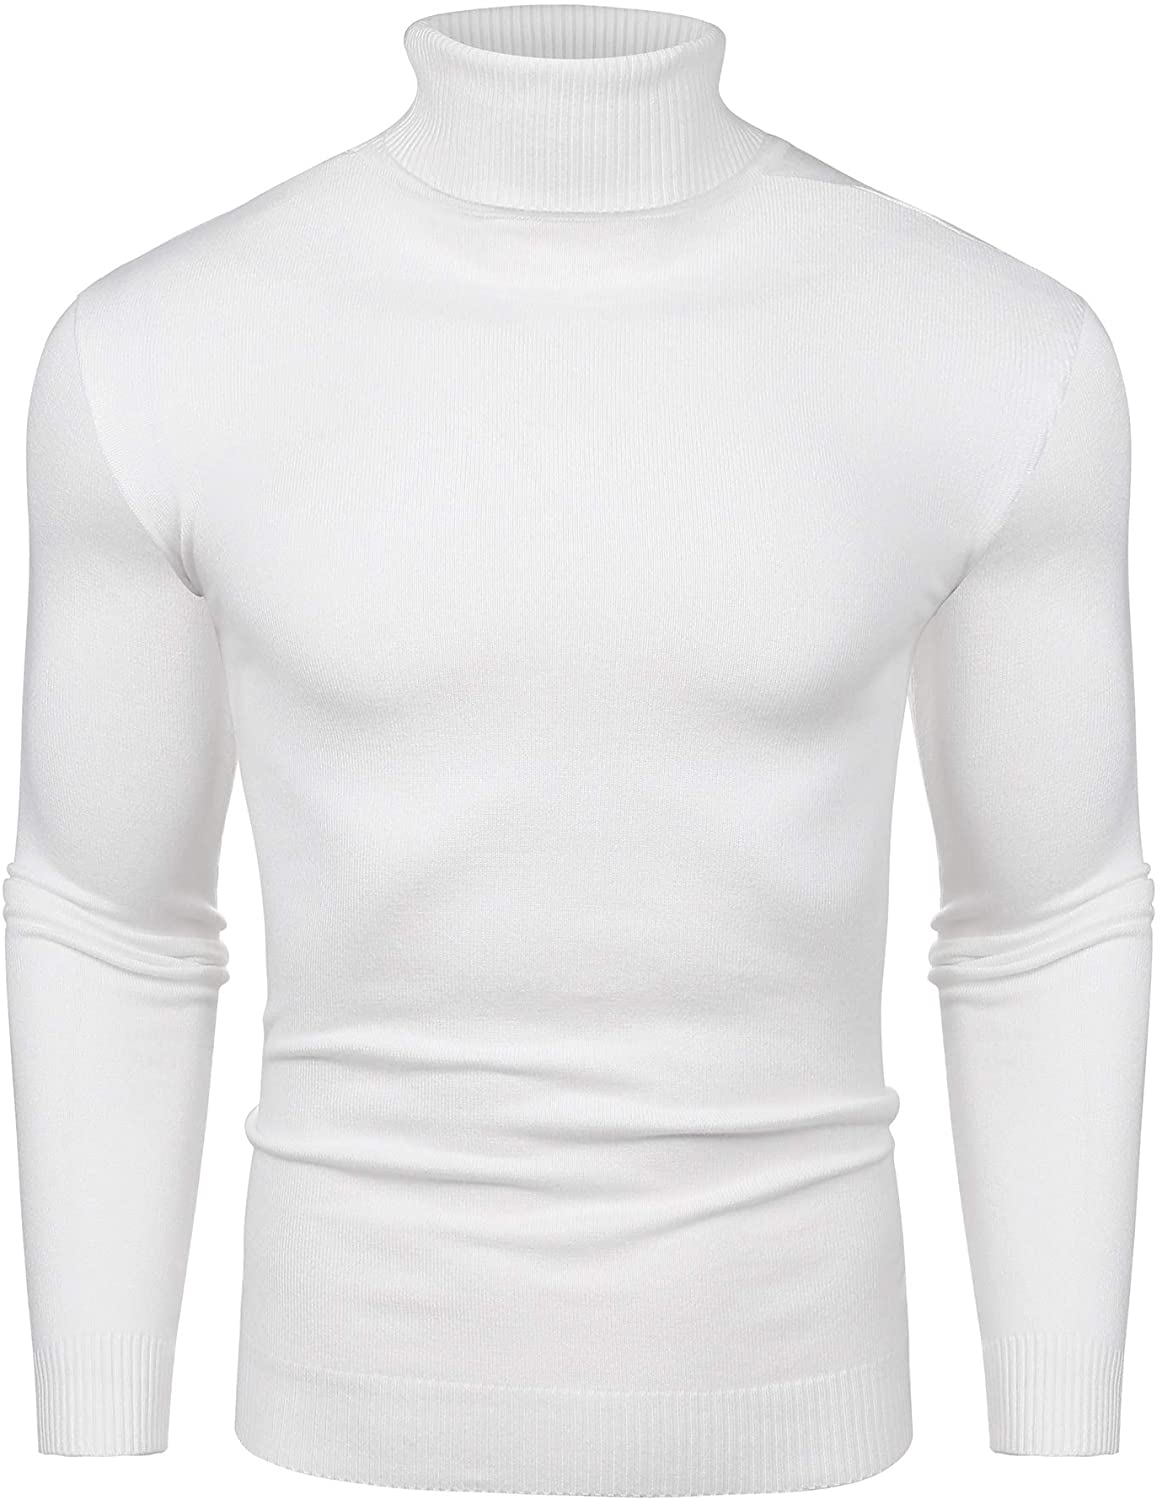 LecGee Men's Slim Fit Turtleneck Sweater Knitted Thermal Basic Pullover Sweaters